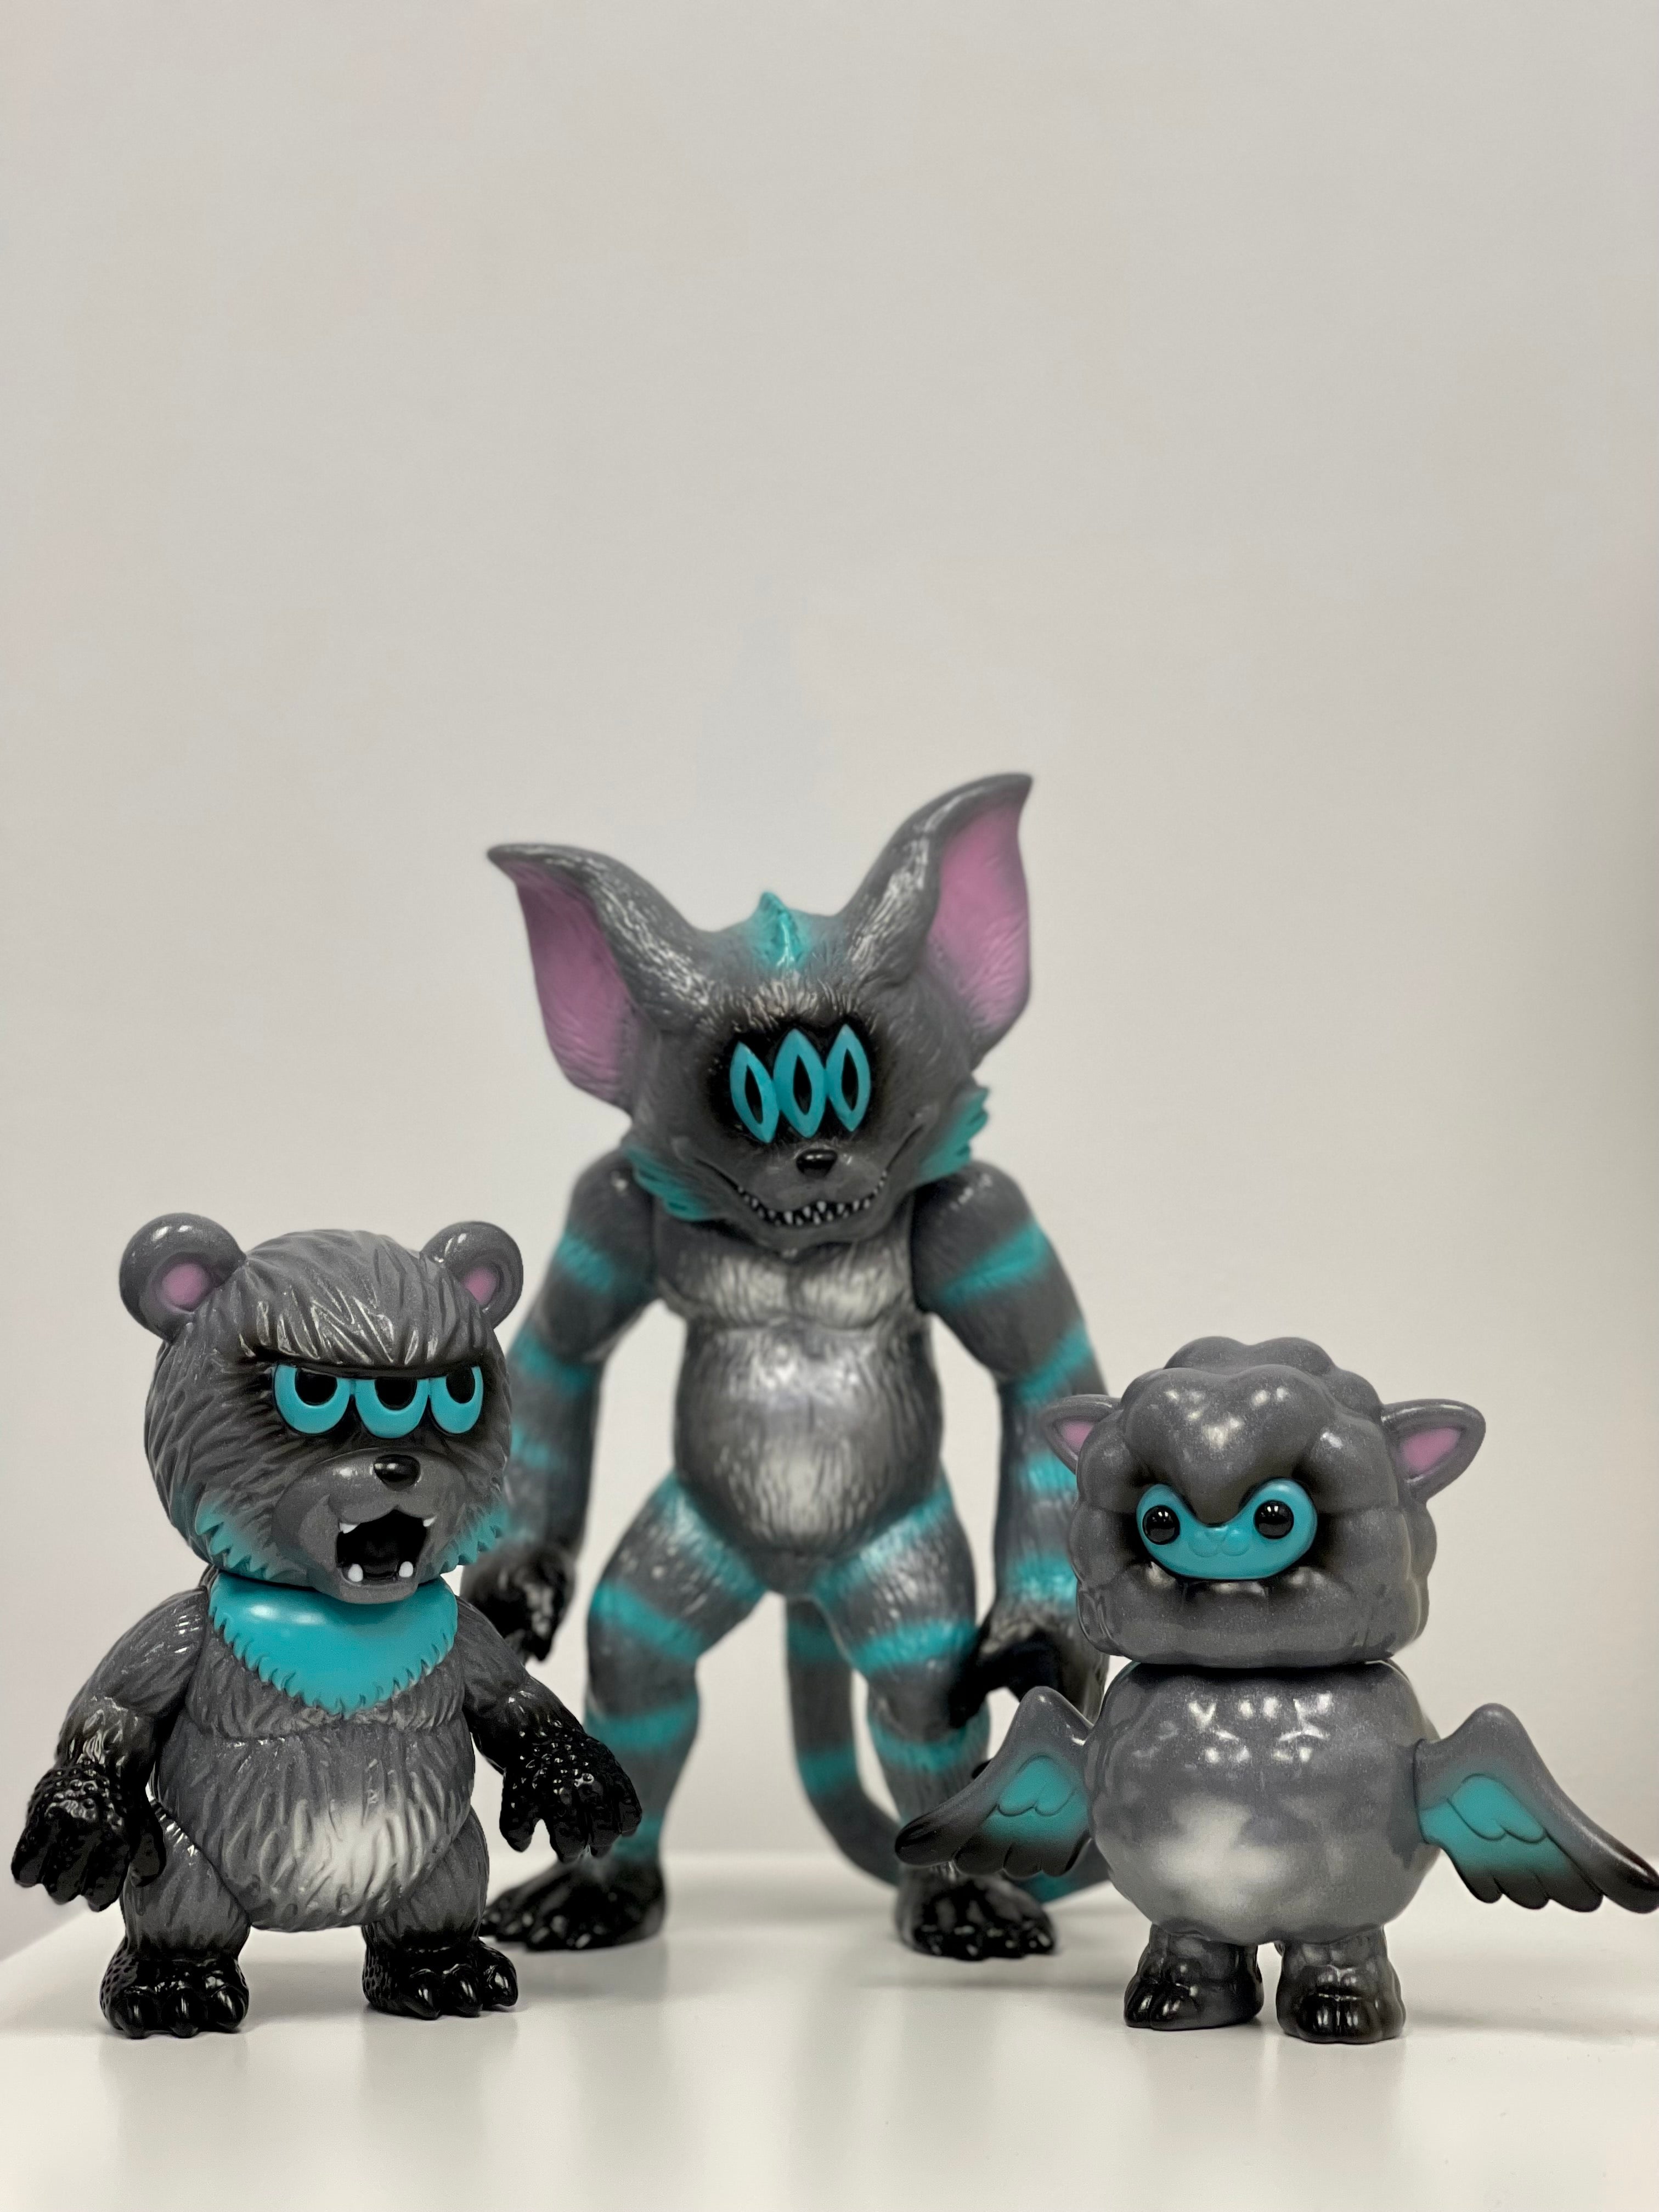 Limited edition Japanese Sofubi Hollywood Cheshire by Art Junkie toy figures: Kumara, Lambdan, and Violent Cat, with unique animal features and cartoon style.